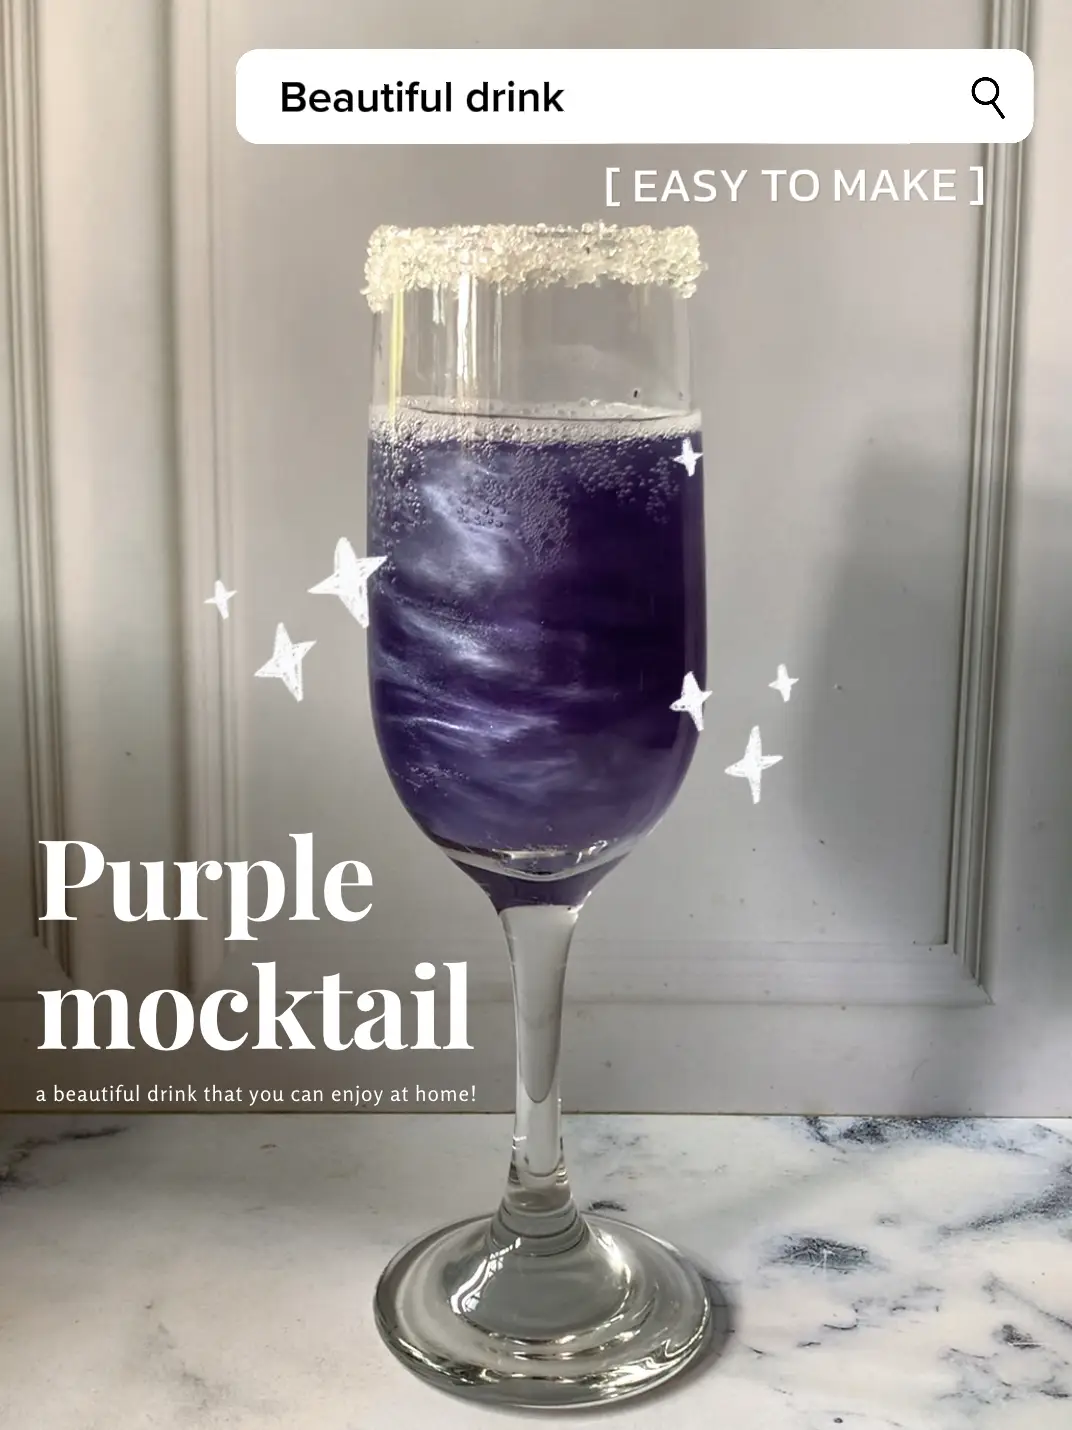 MAKING BEAUTIFUL DRINK AT HOME, ONLY 3INGREDIENTS!'s images